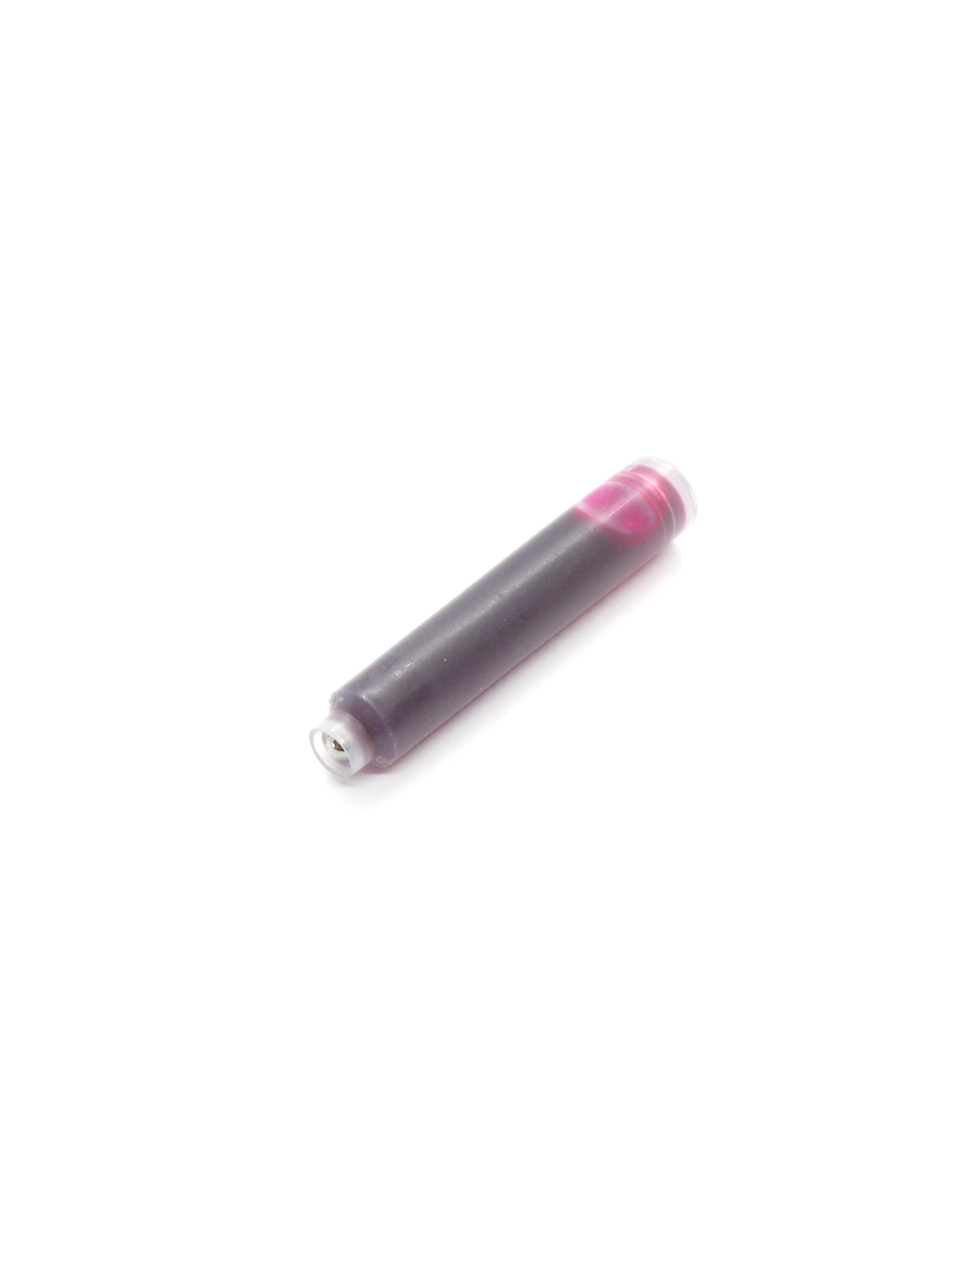 Cartridges For Retro 51 Fountain Pens (Pink)